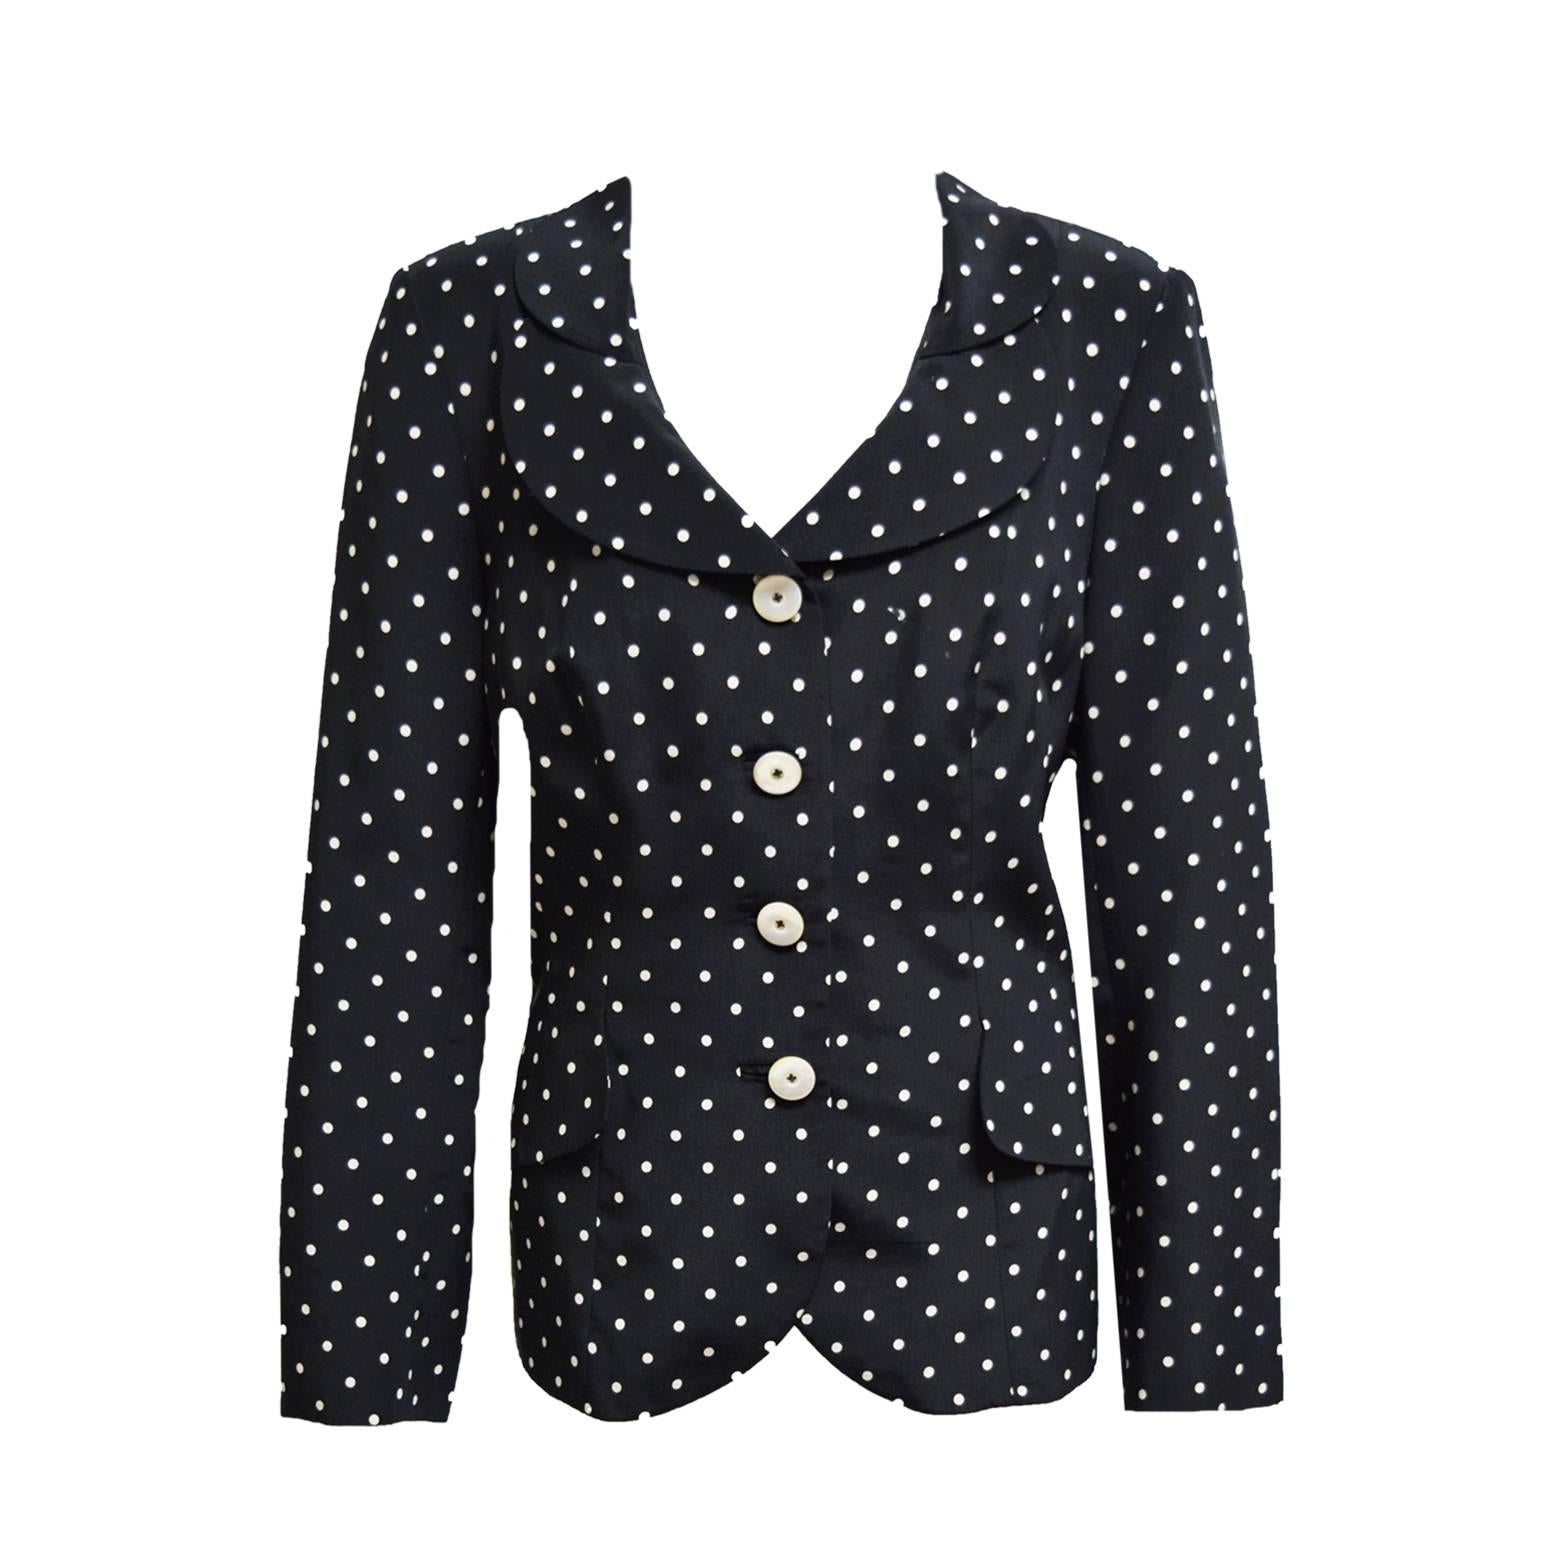 This amazing ensemble by Algo is made of 100% silk and is printed in black and white polka dots. The jacket is single lapeled and the skirt has  a back zipper. Both are fully lined. 